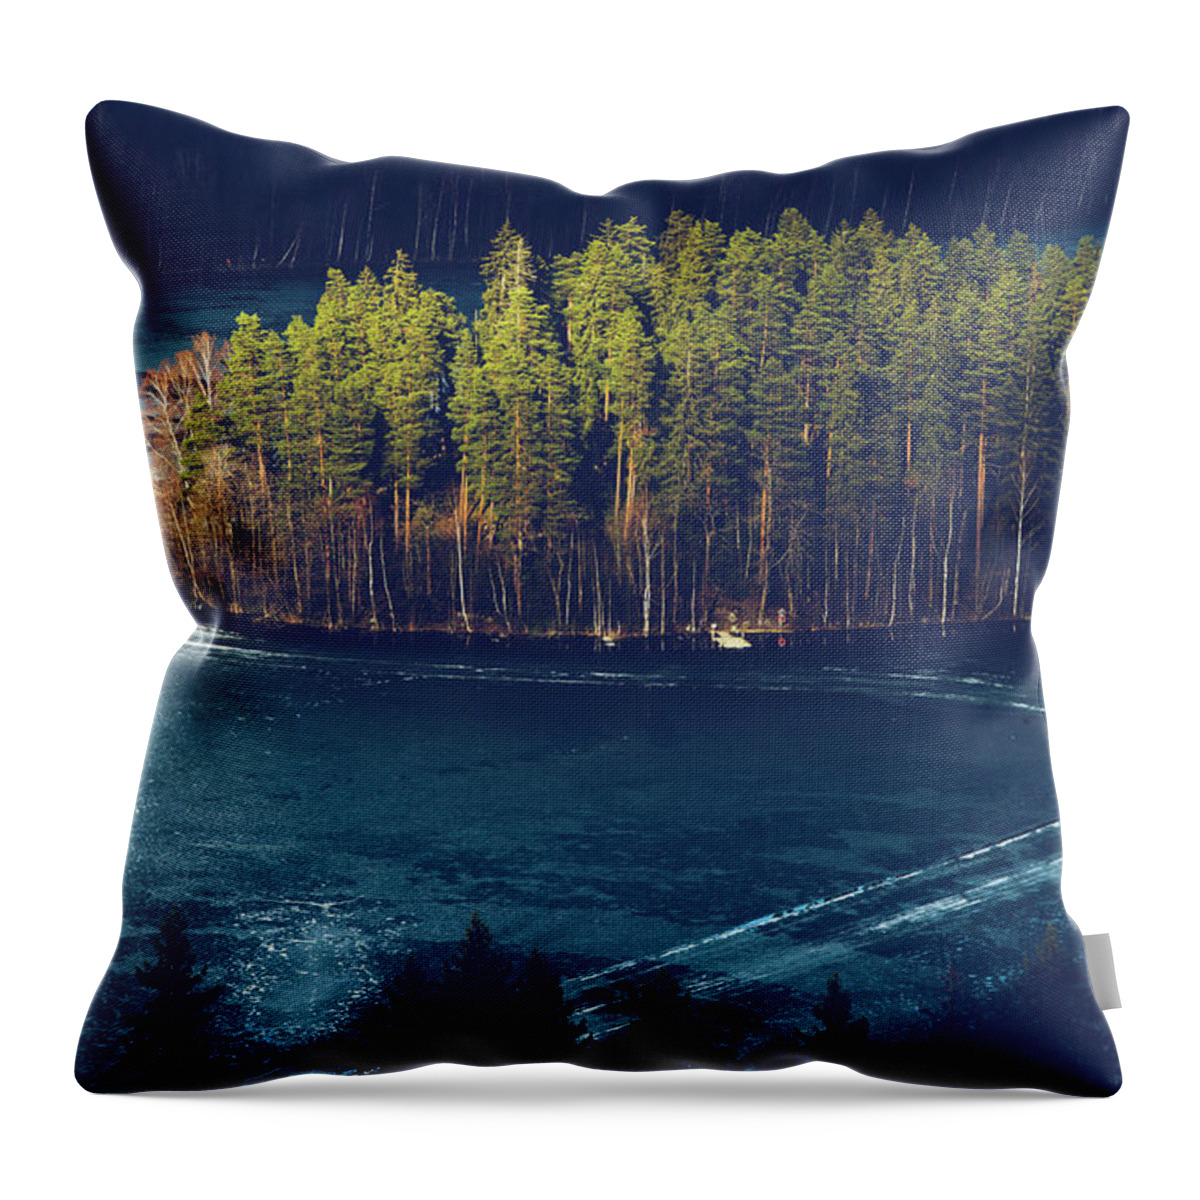 Tranquility Throw Pillow featuring the photograph Springtime Ice In Finland by Rasmus Hartikainen